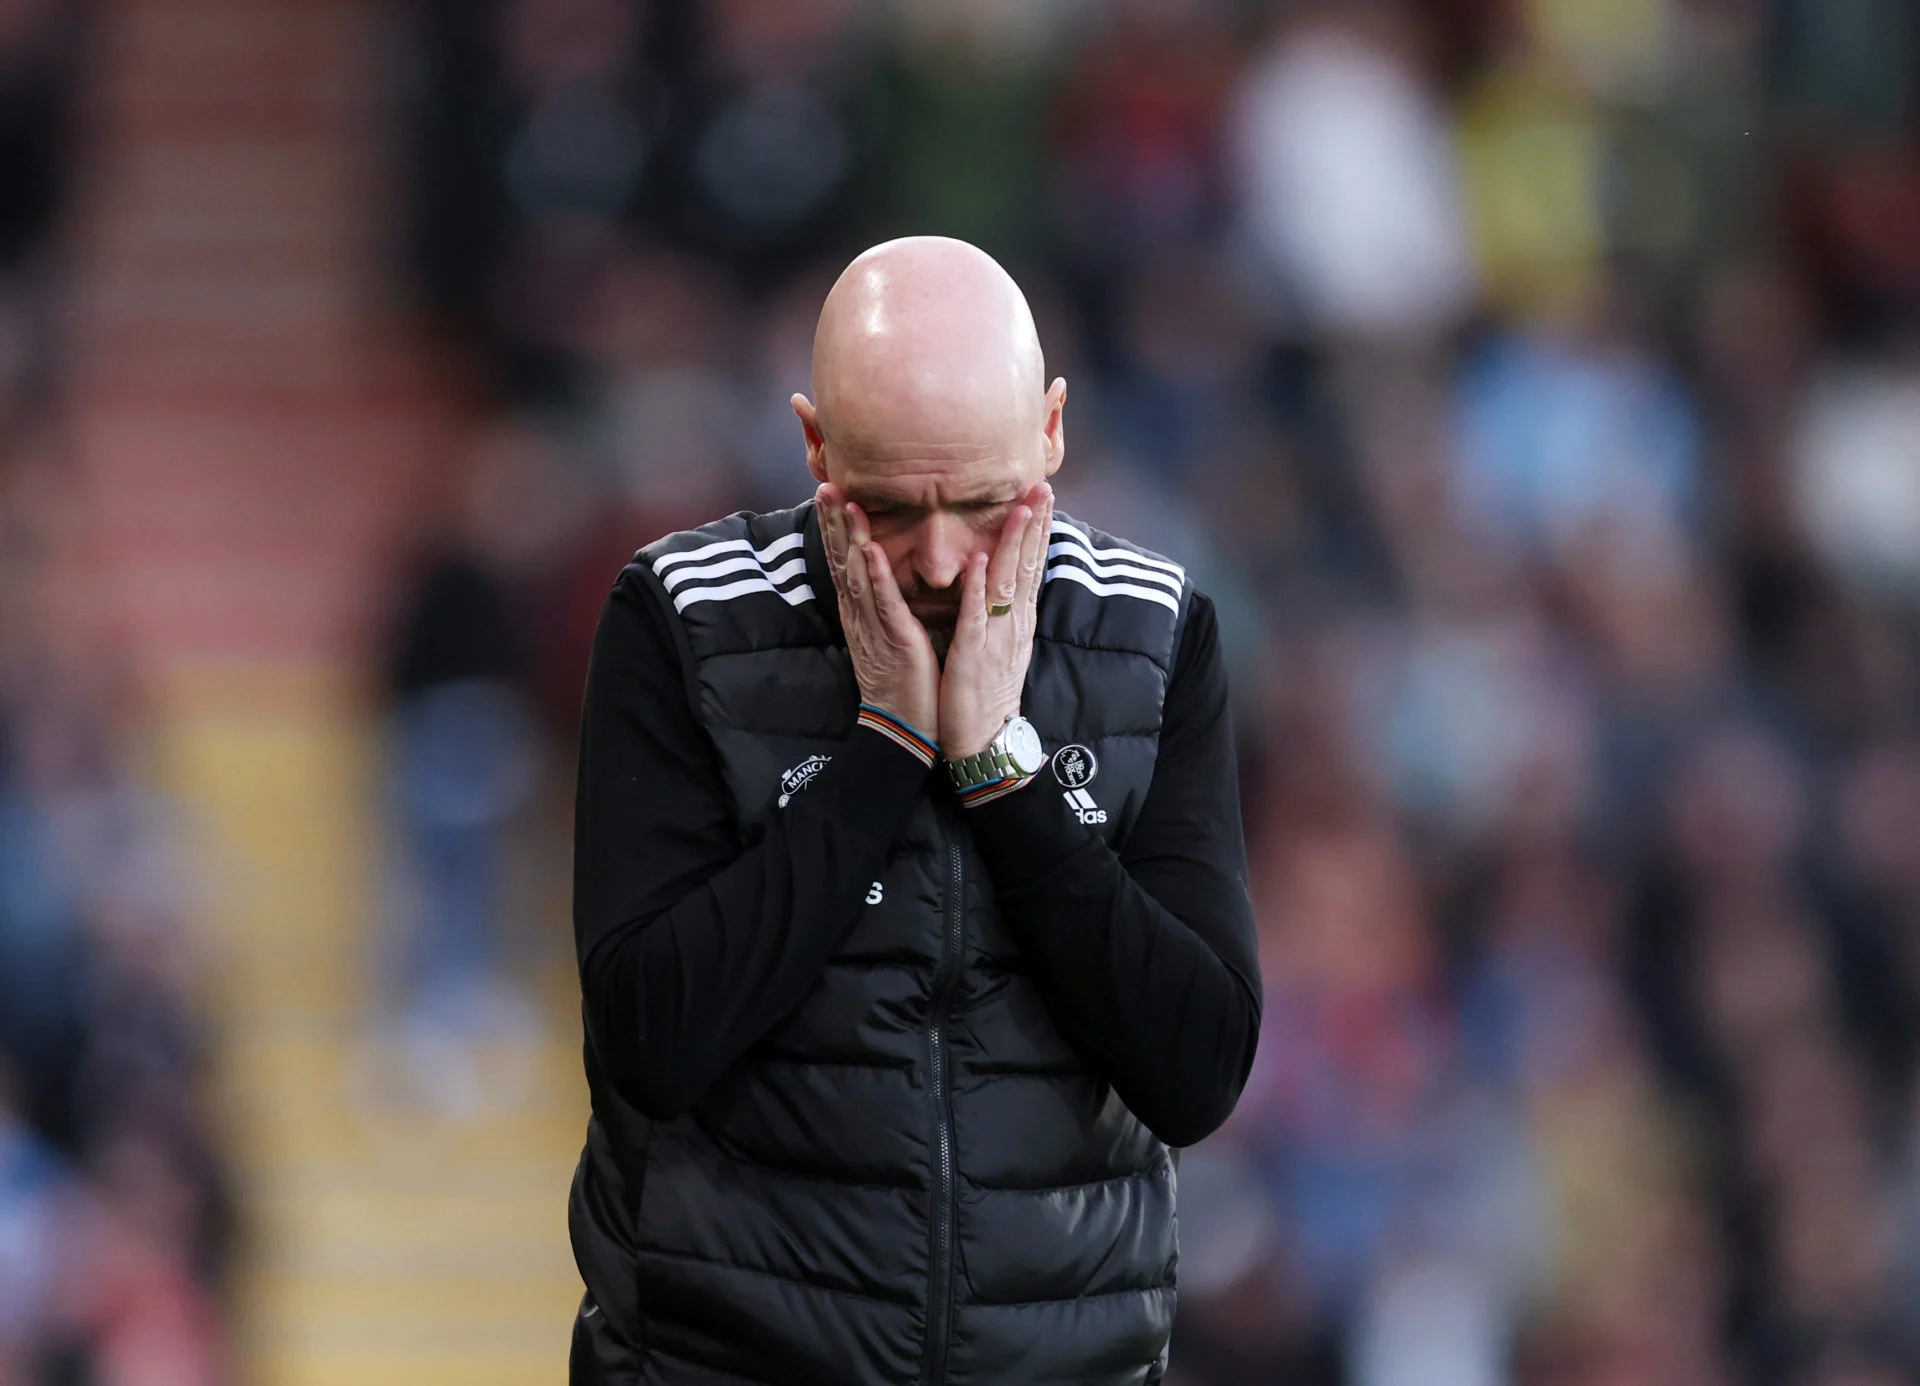 Erik ten Hag given strict instructions after being retained